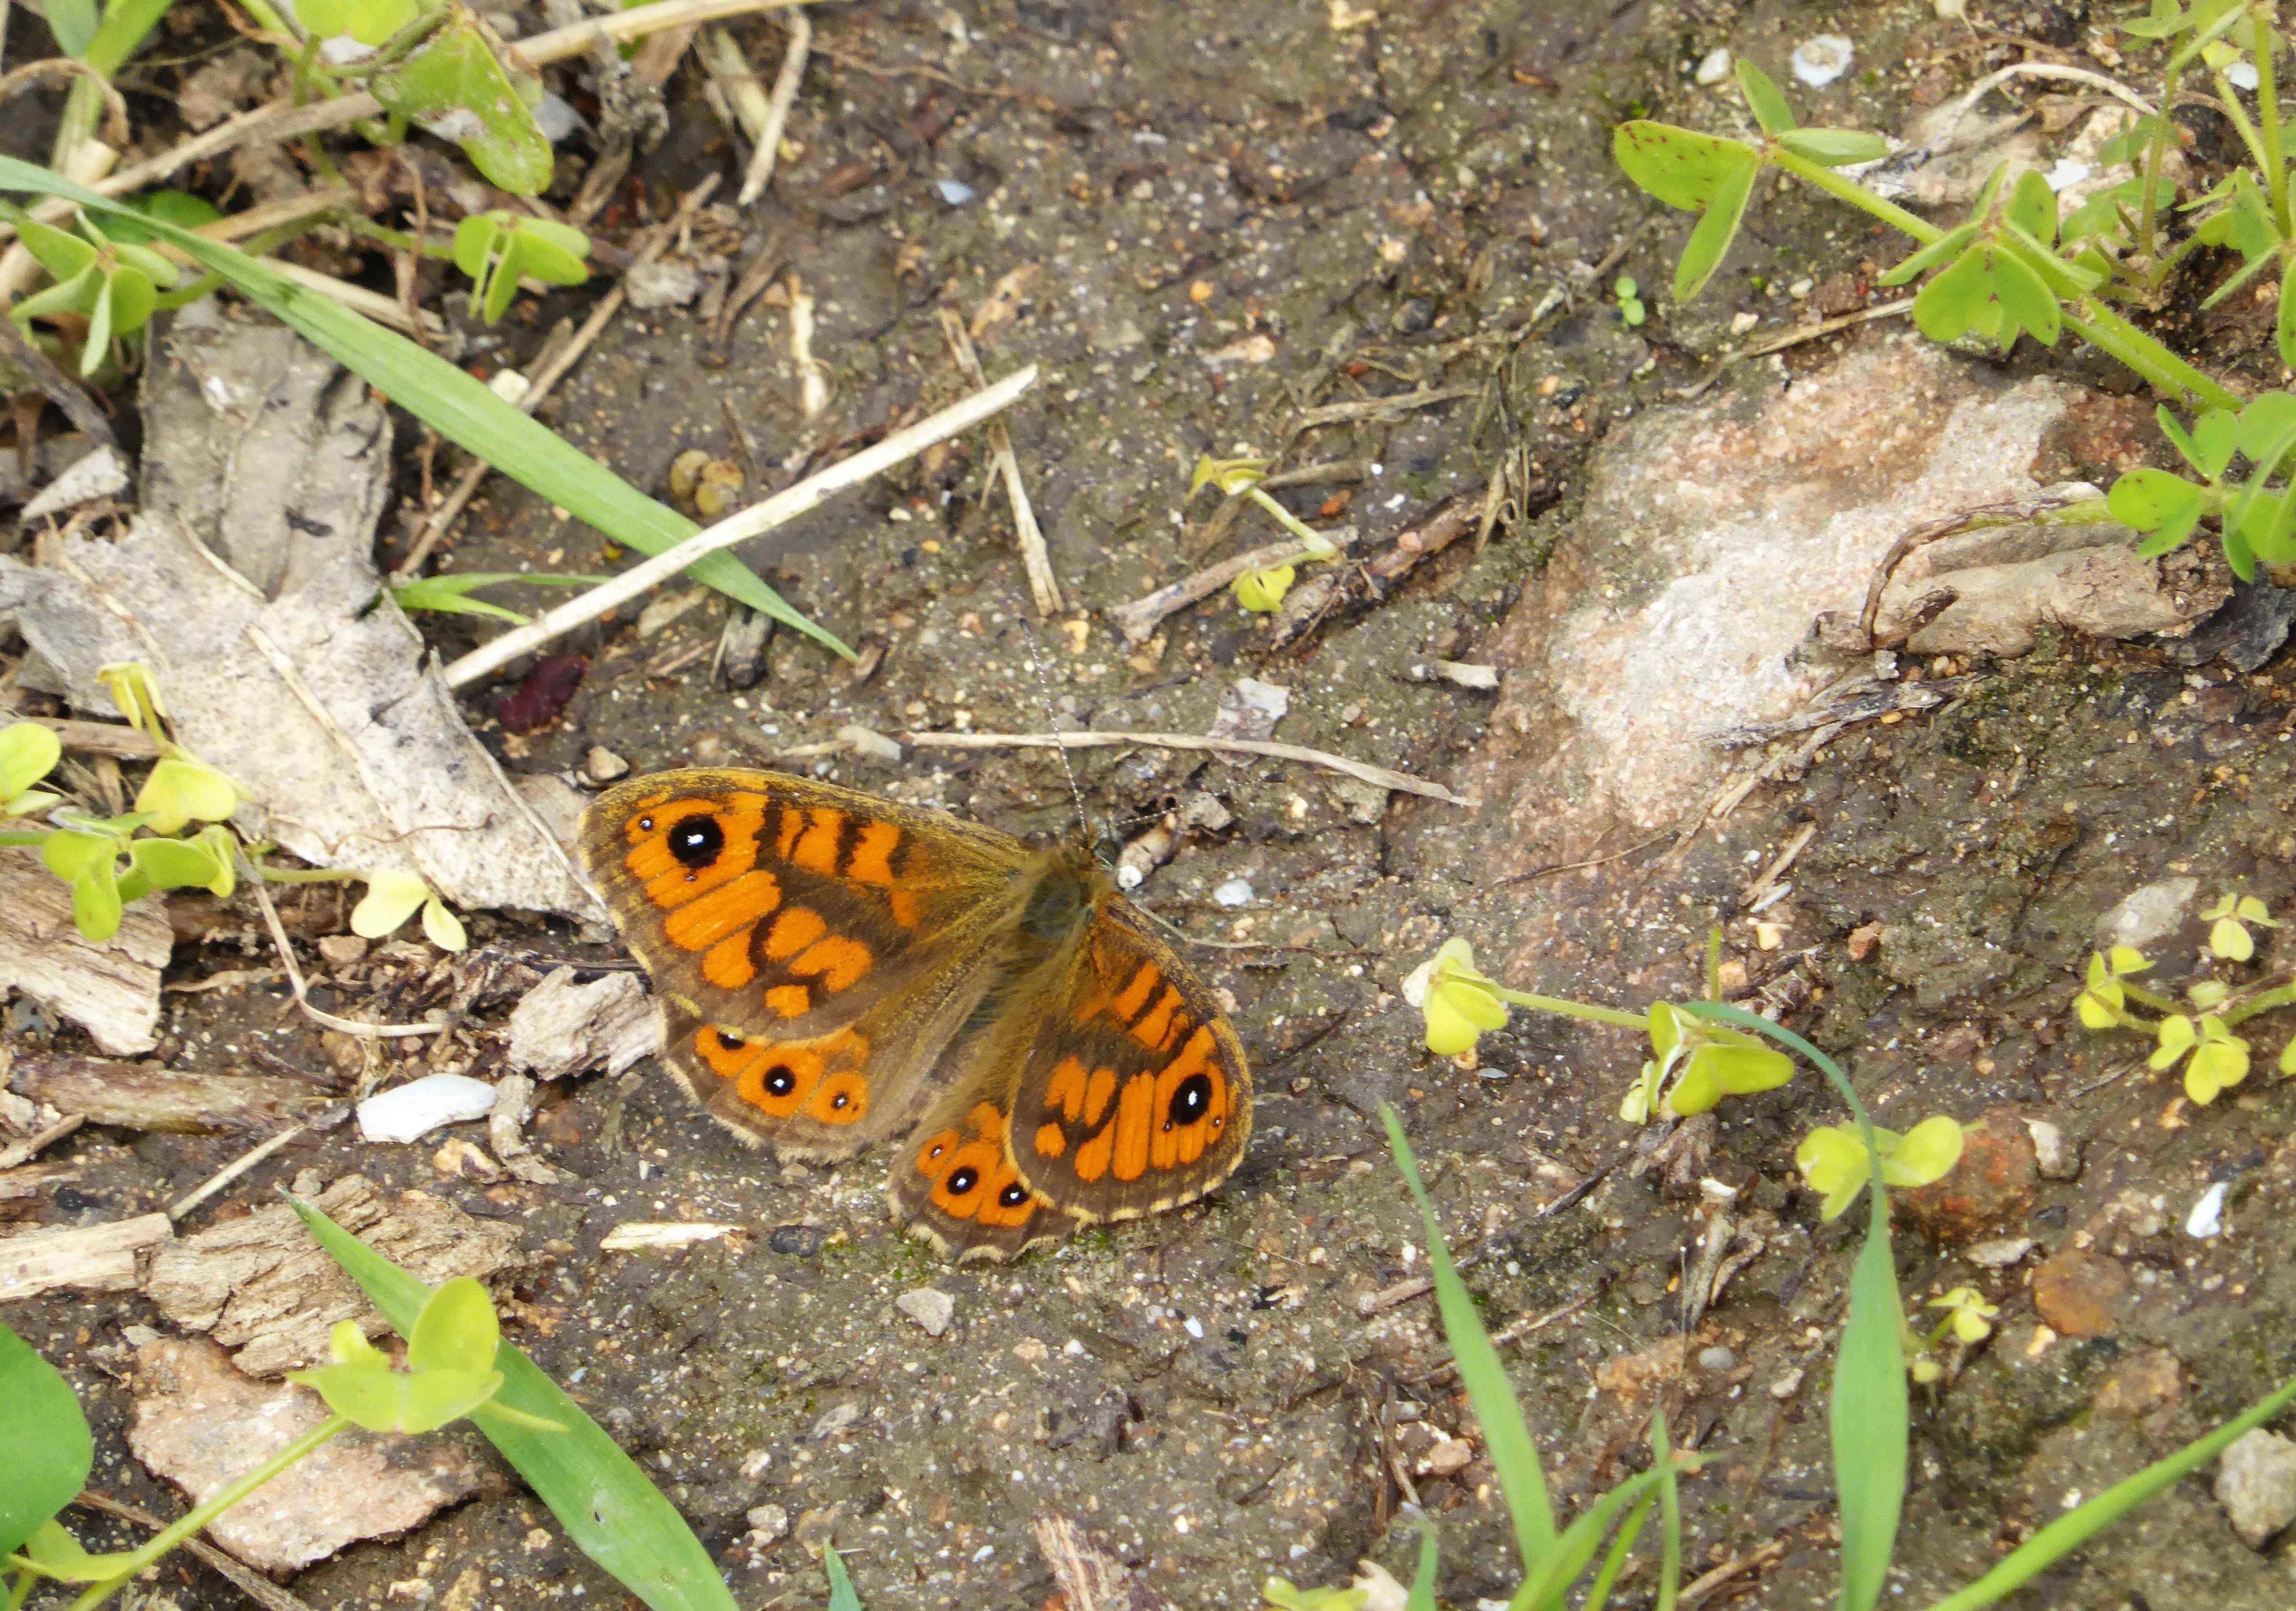 The Wall Brown gets it's name from its delight of sunning itself on walls, rocks, paths, etc. and is more energetic than the typical bobbing, leisurely nature of most of the Browns.